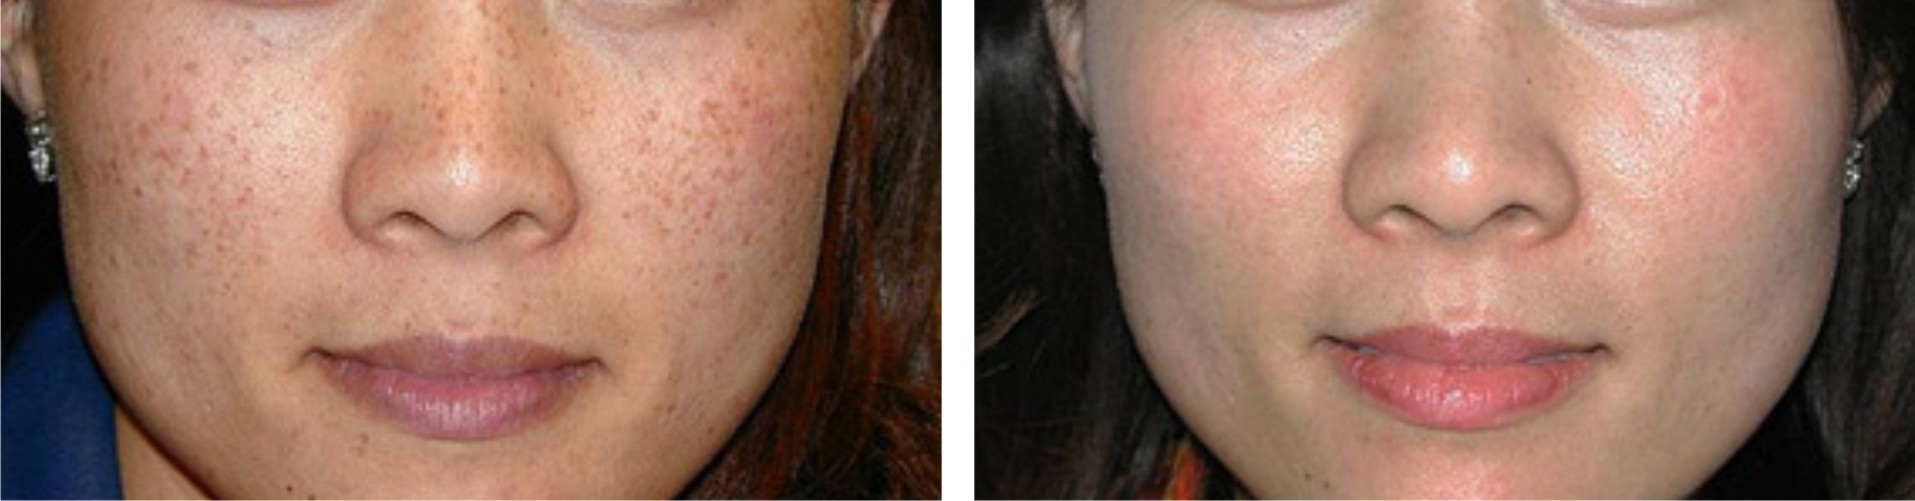 Laser Freckle Removal Image Two